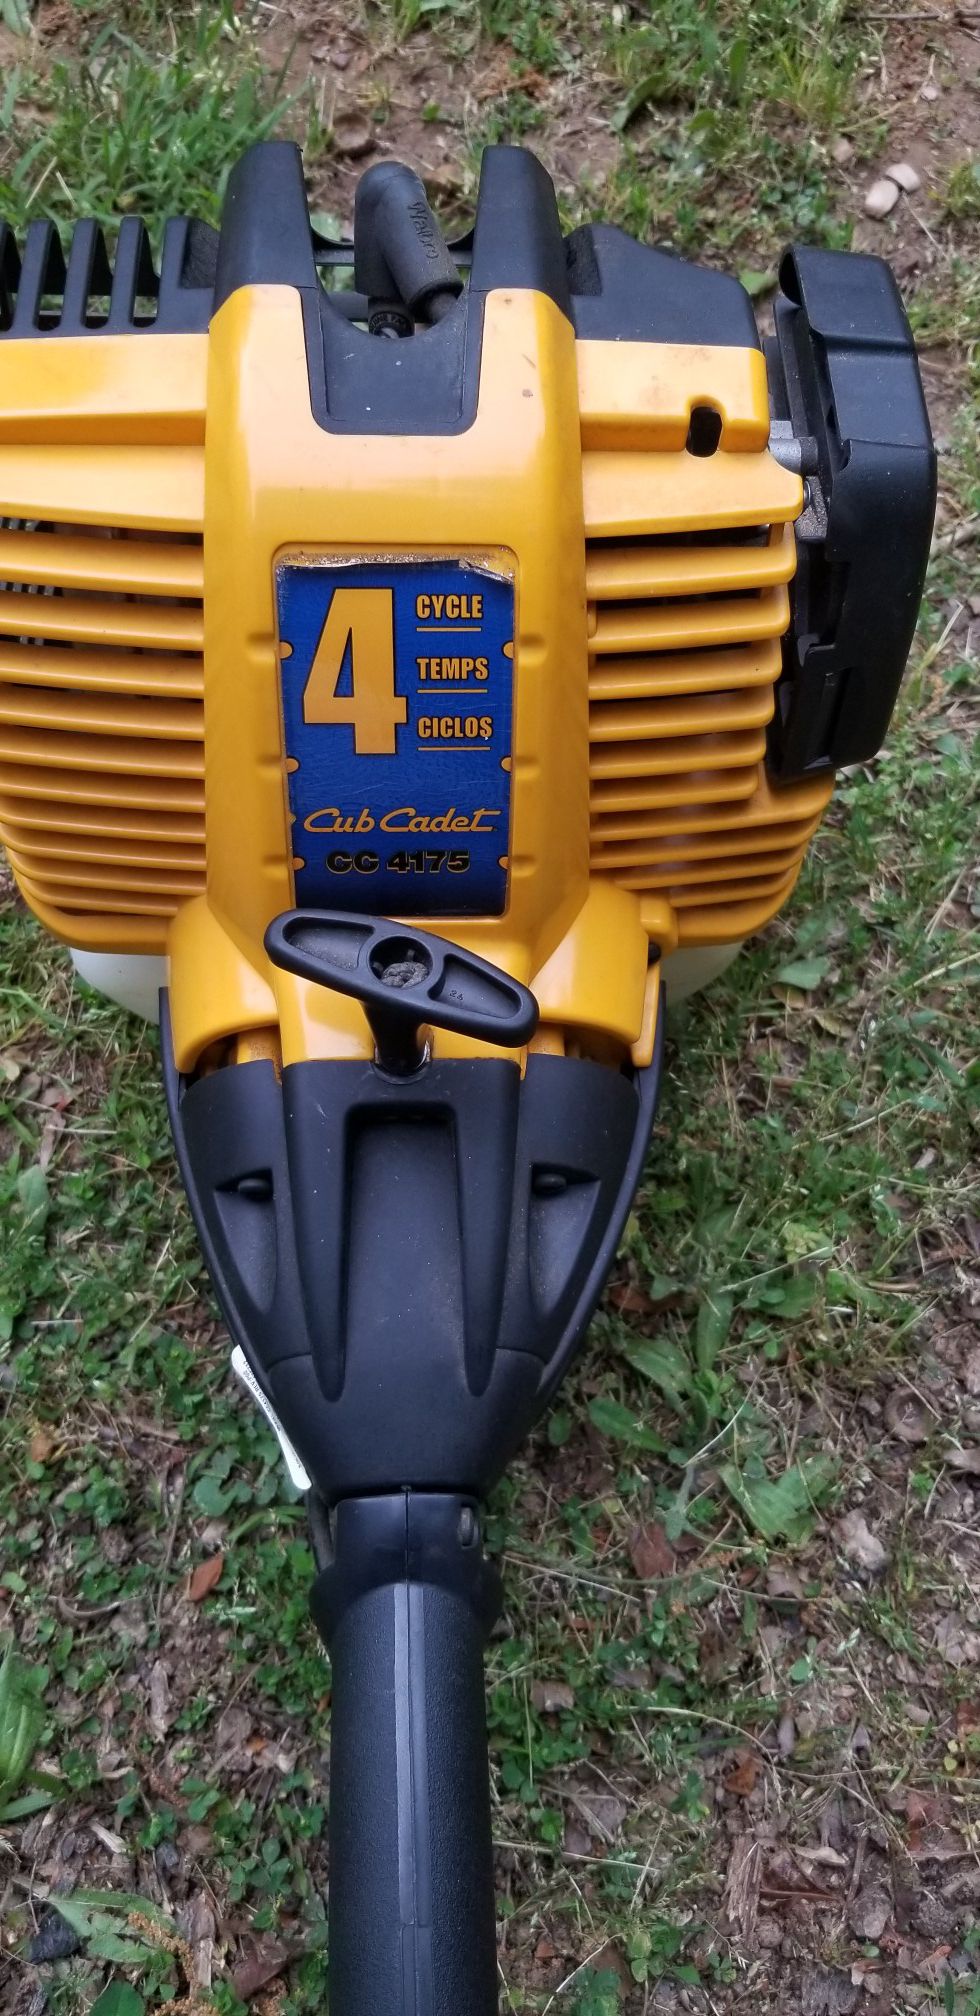 Cub cadet 4 cycle weedeater